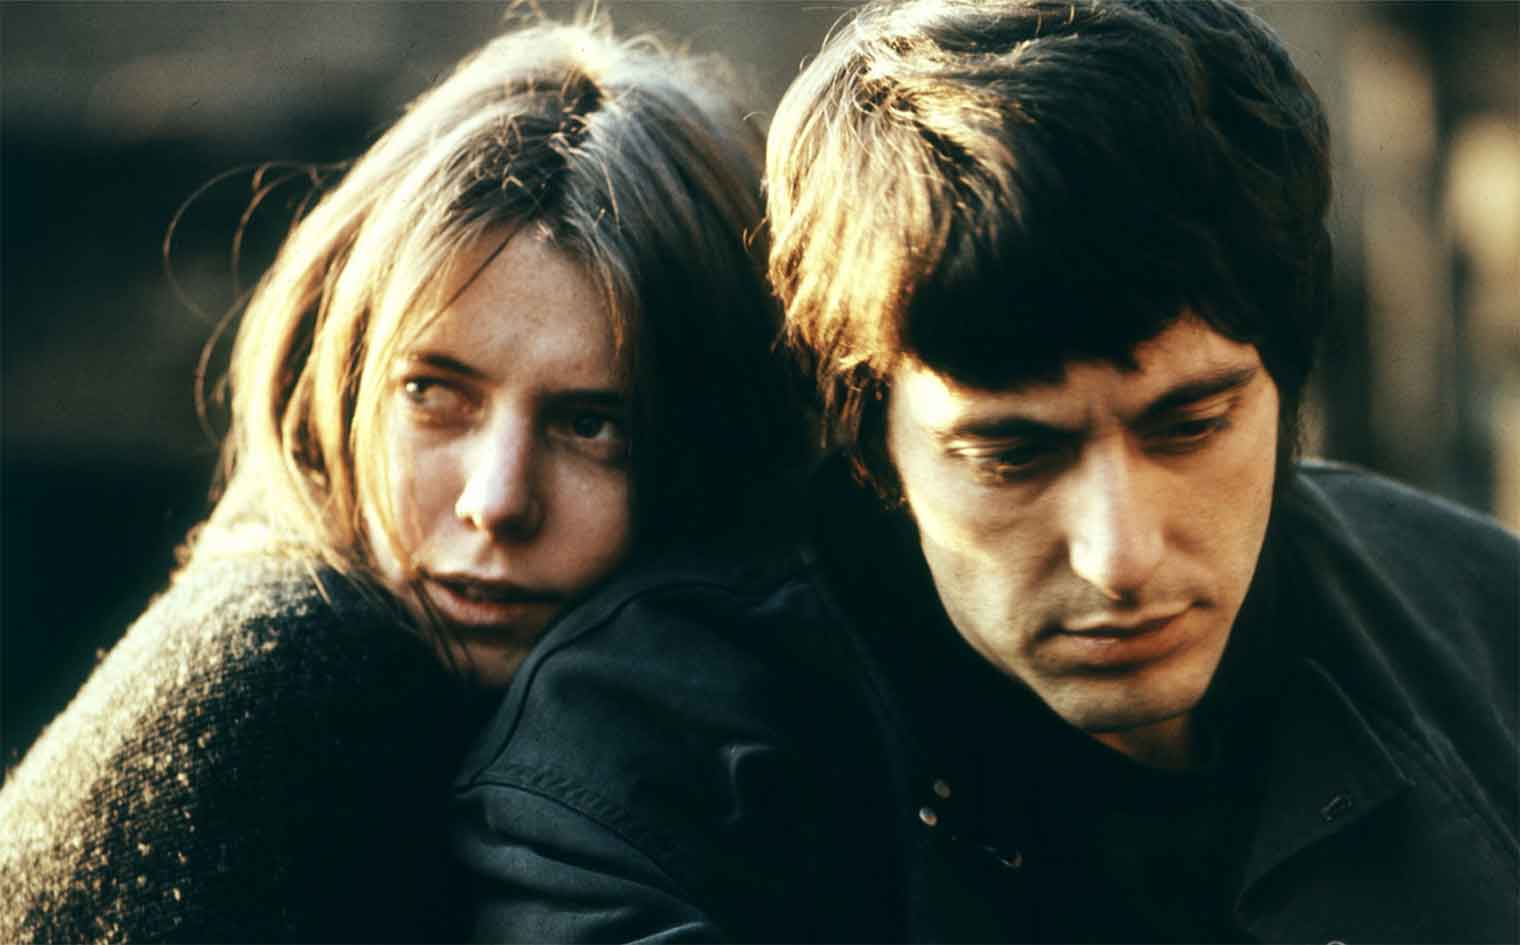 The Panic In Needle Park (1971)